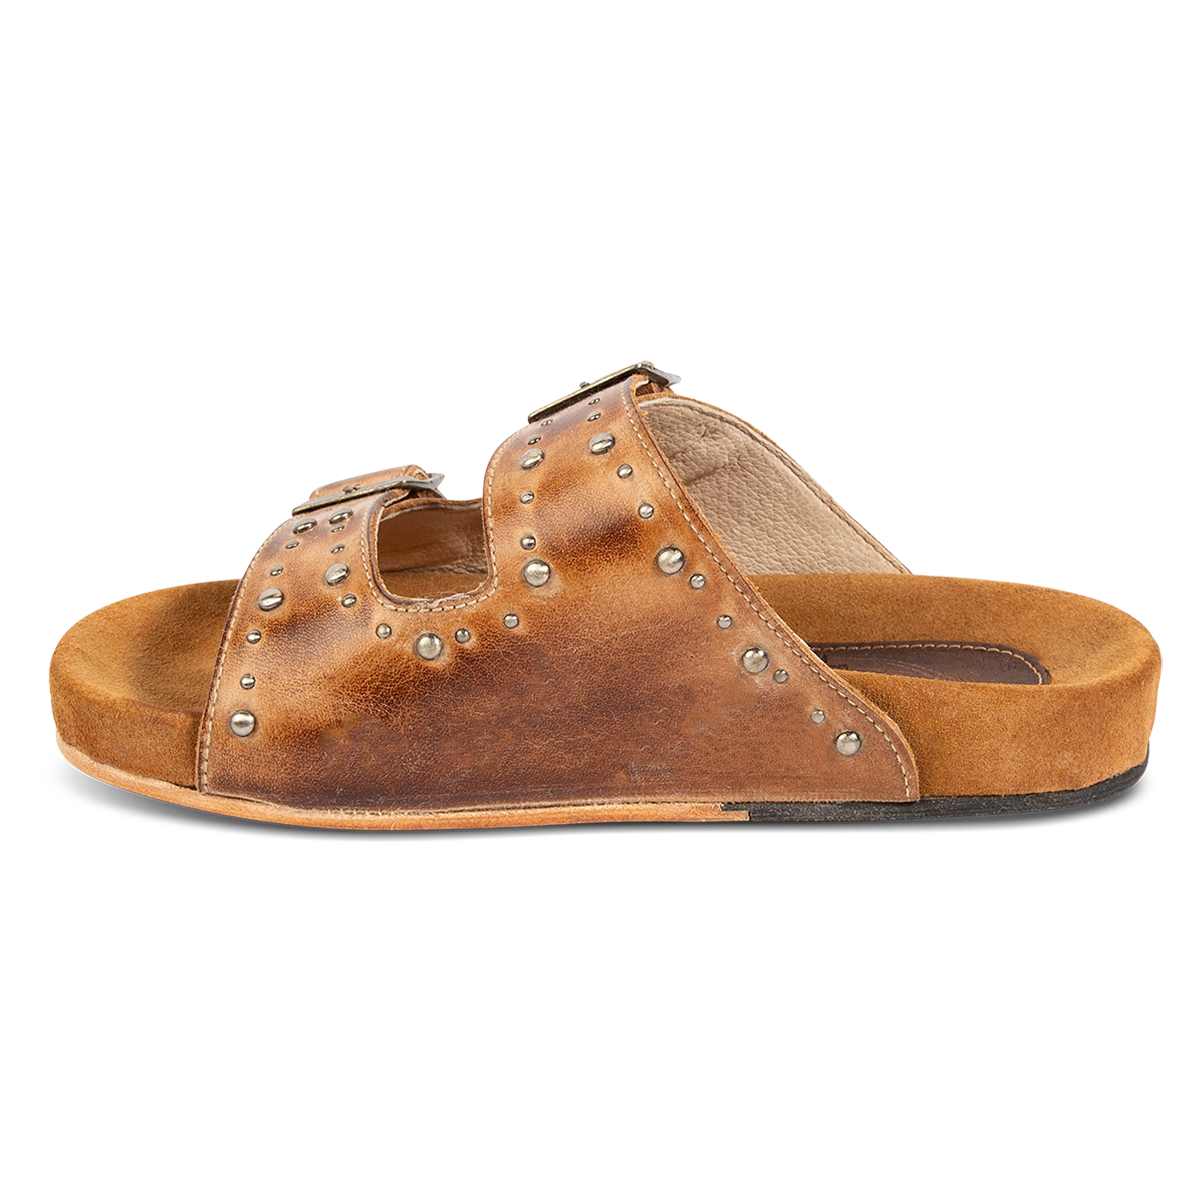 Inside view showing FREEBIRD women's Asher wheat sandal with adjustable belt buckles, a suede footbed and silver embellishments